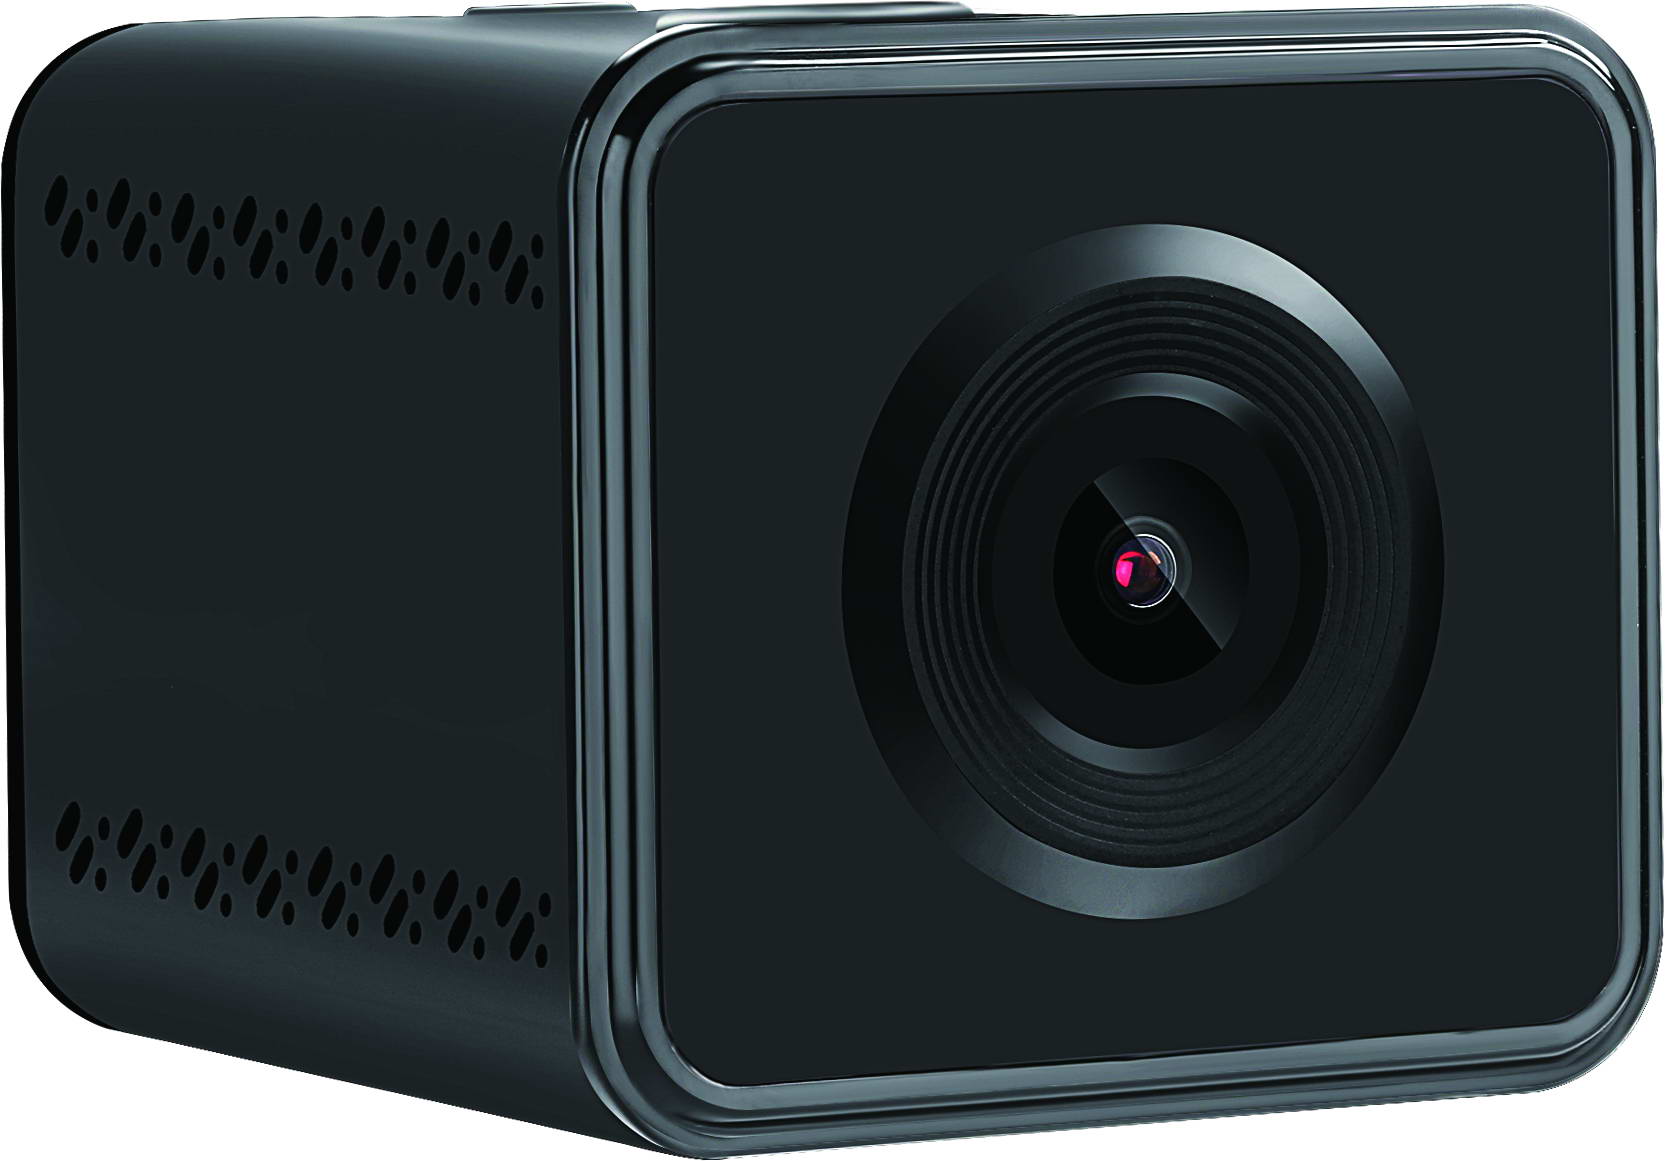 Auto Drive 4K 1080p Dash Cam with Snap and Save Button and Continuous Loop Recording - image 2 of 9